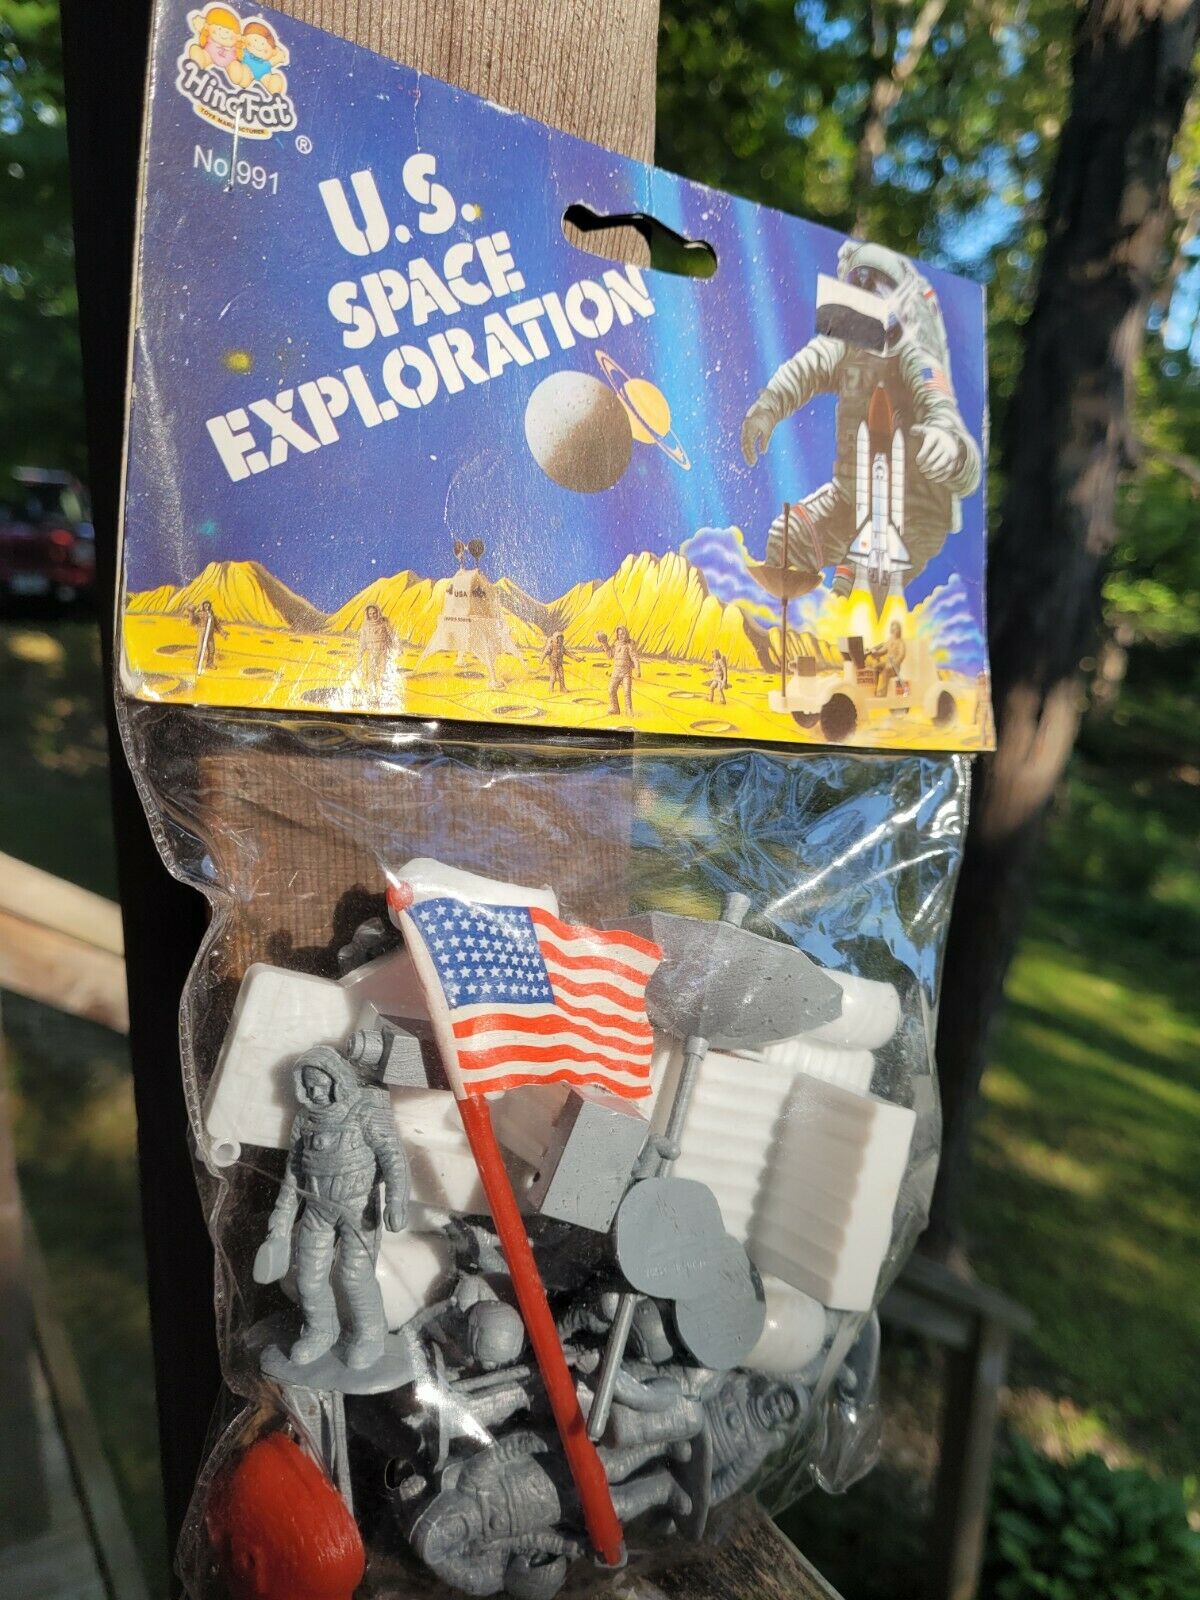 Hong Fat Toy Co No. 991 U.s Space Exploration Toy Play Set